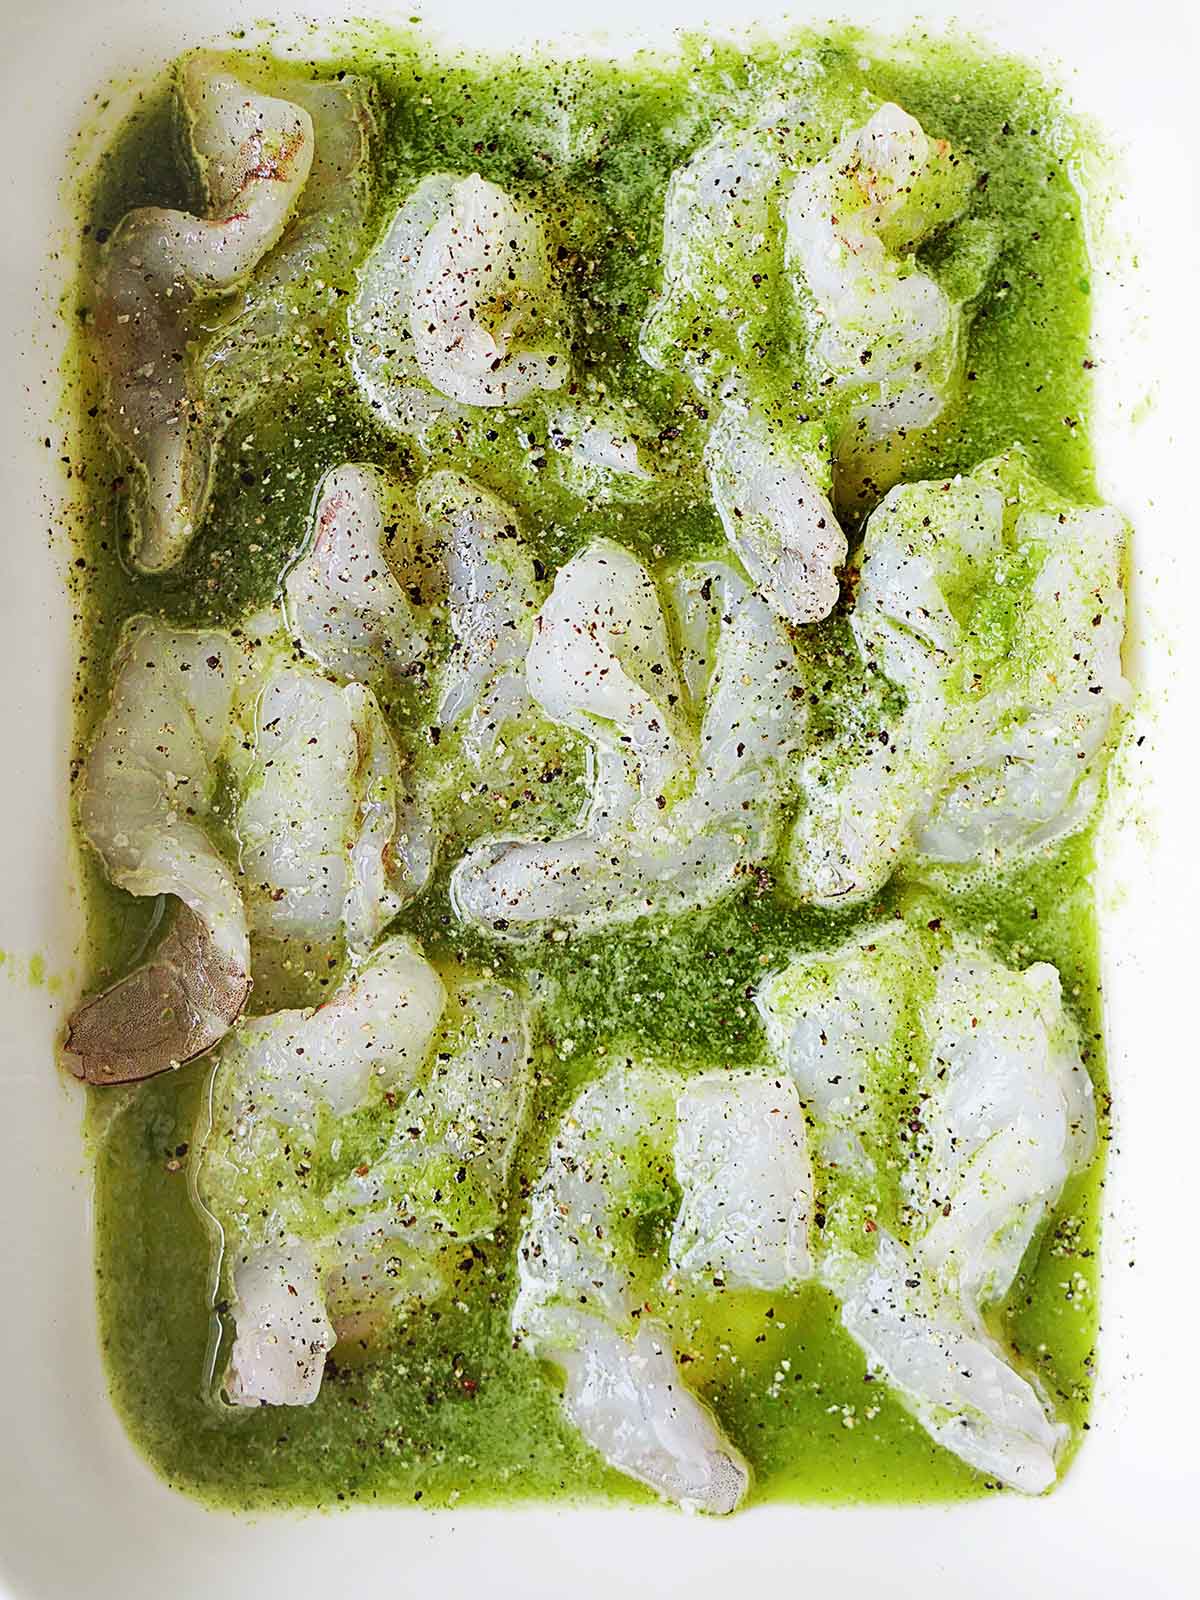 A serving dish with raw shrimp marinating in chile water.